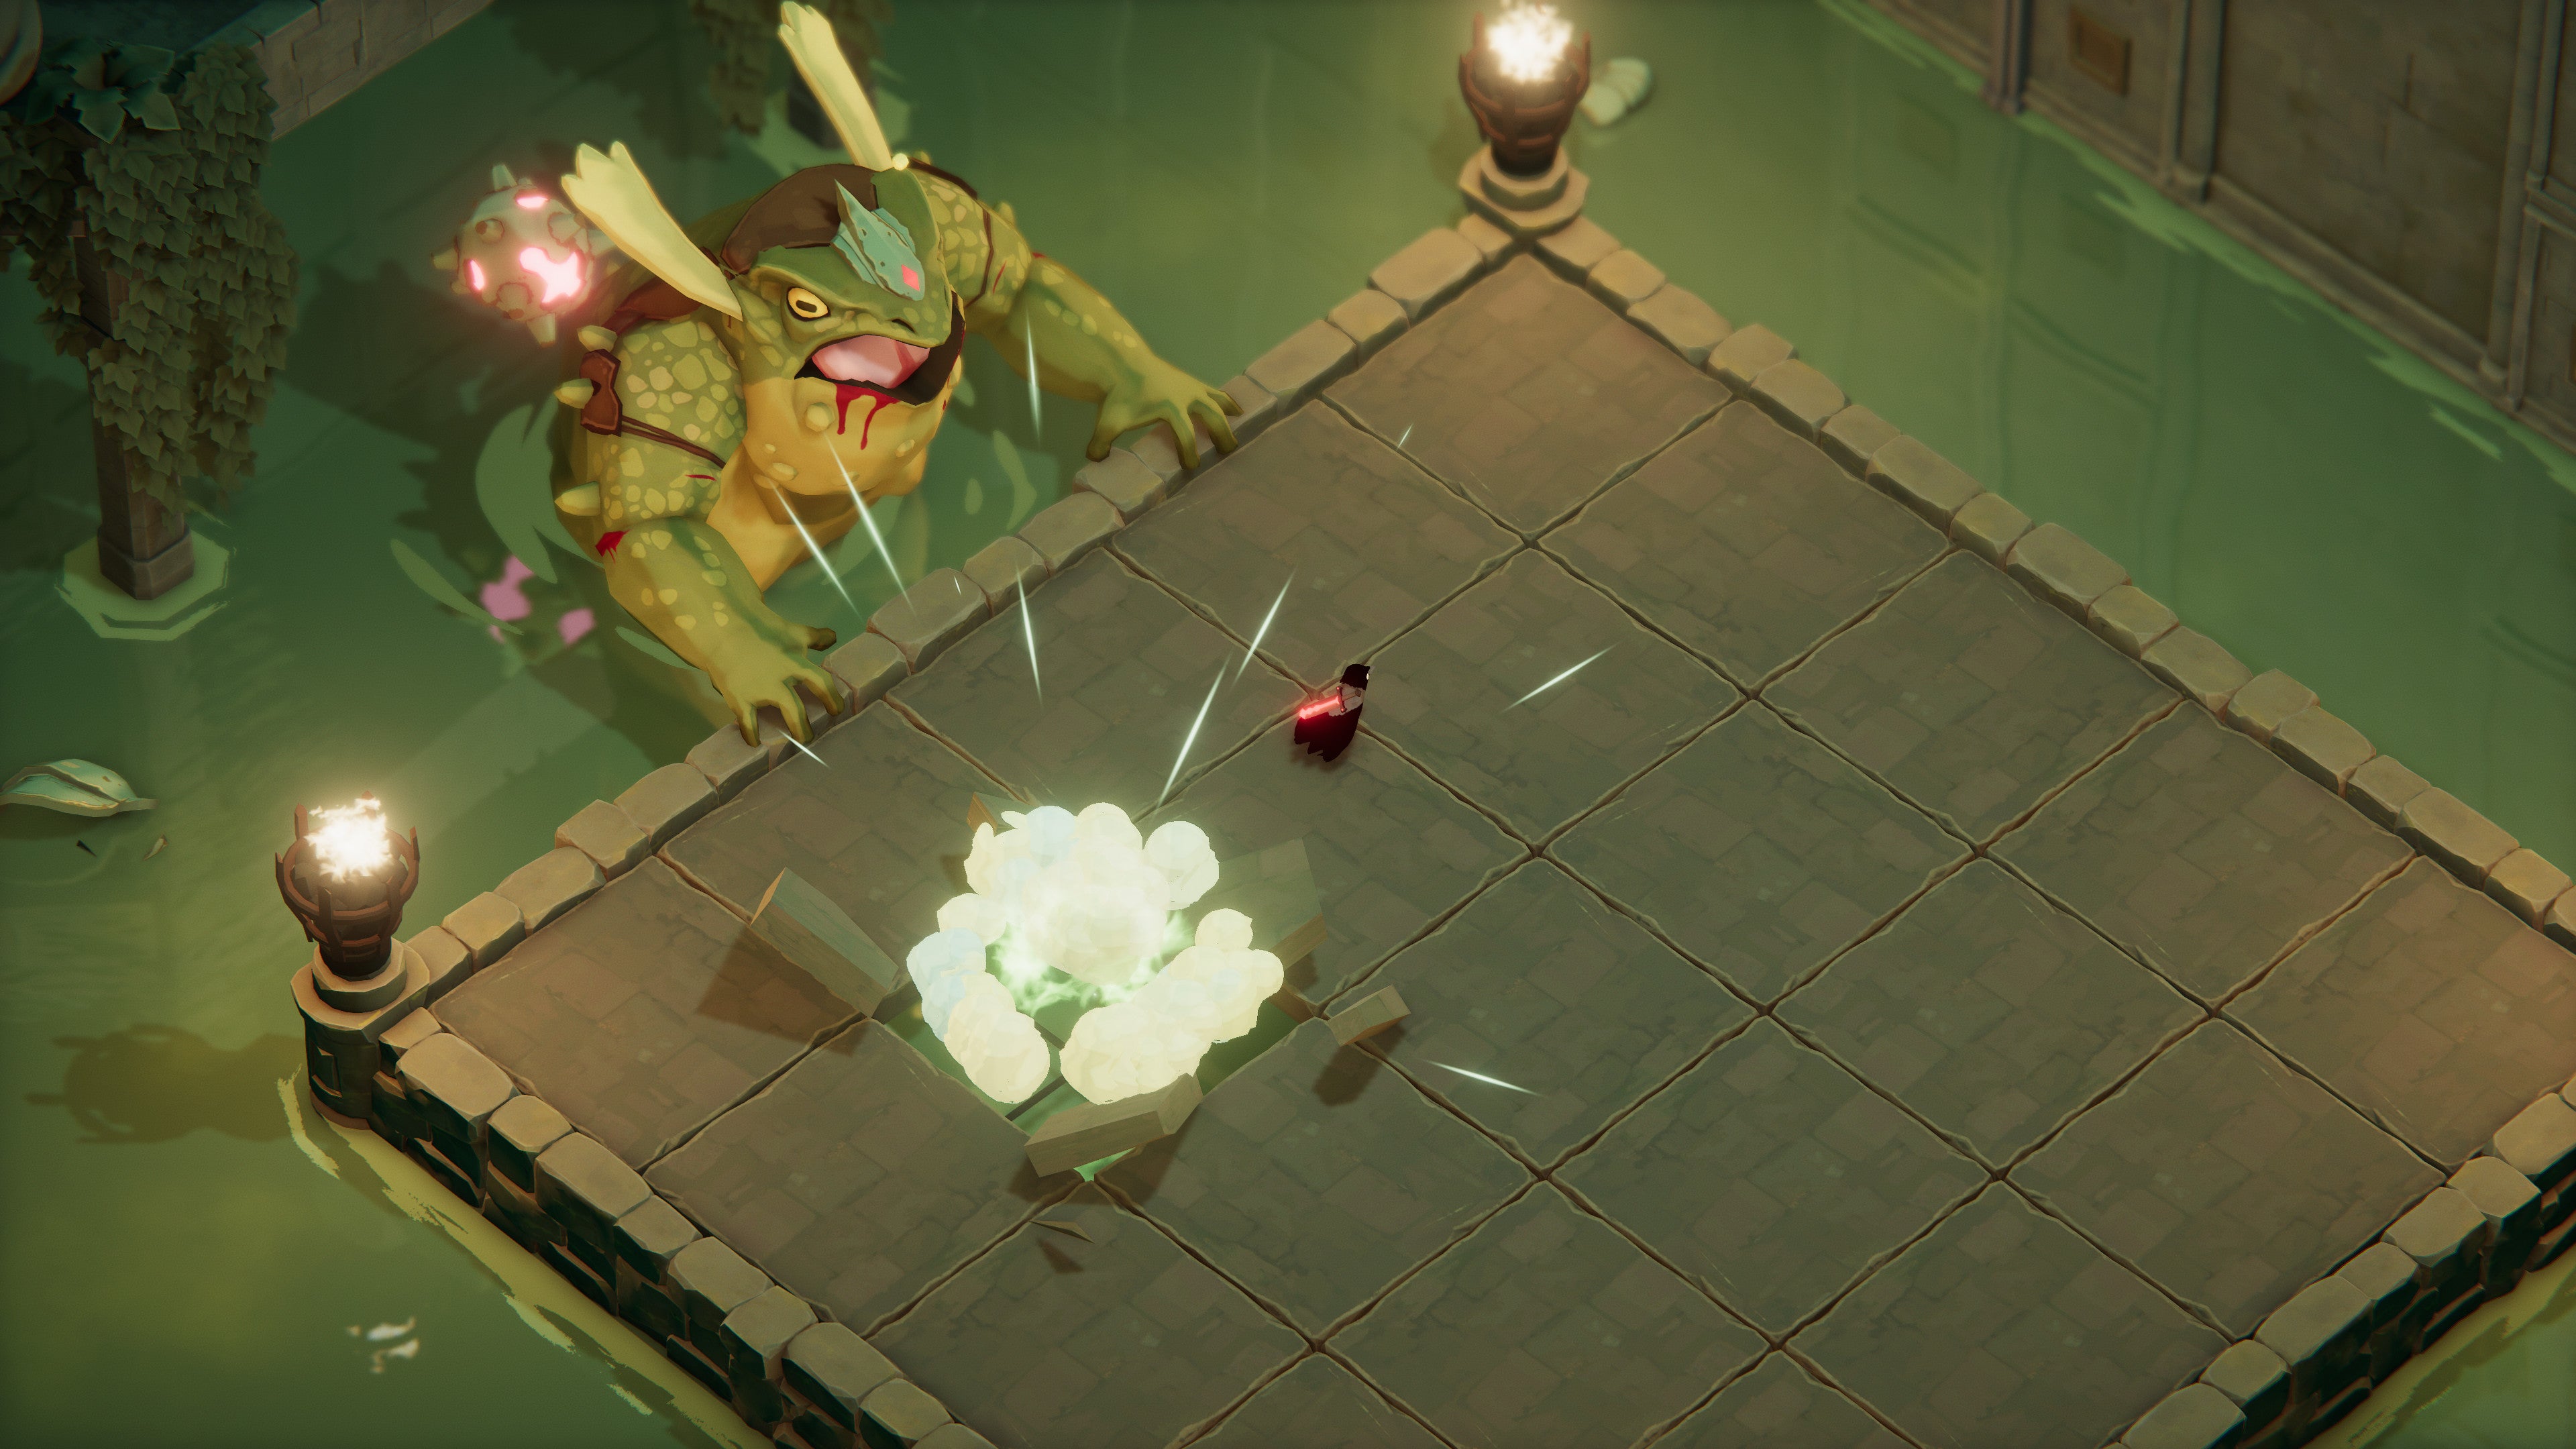 A screenshot of Death's Door showing a big frog man emerging from some water and seemingly smashing part of a platform being stood on by the player, who is a crow.